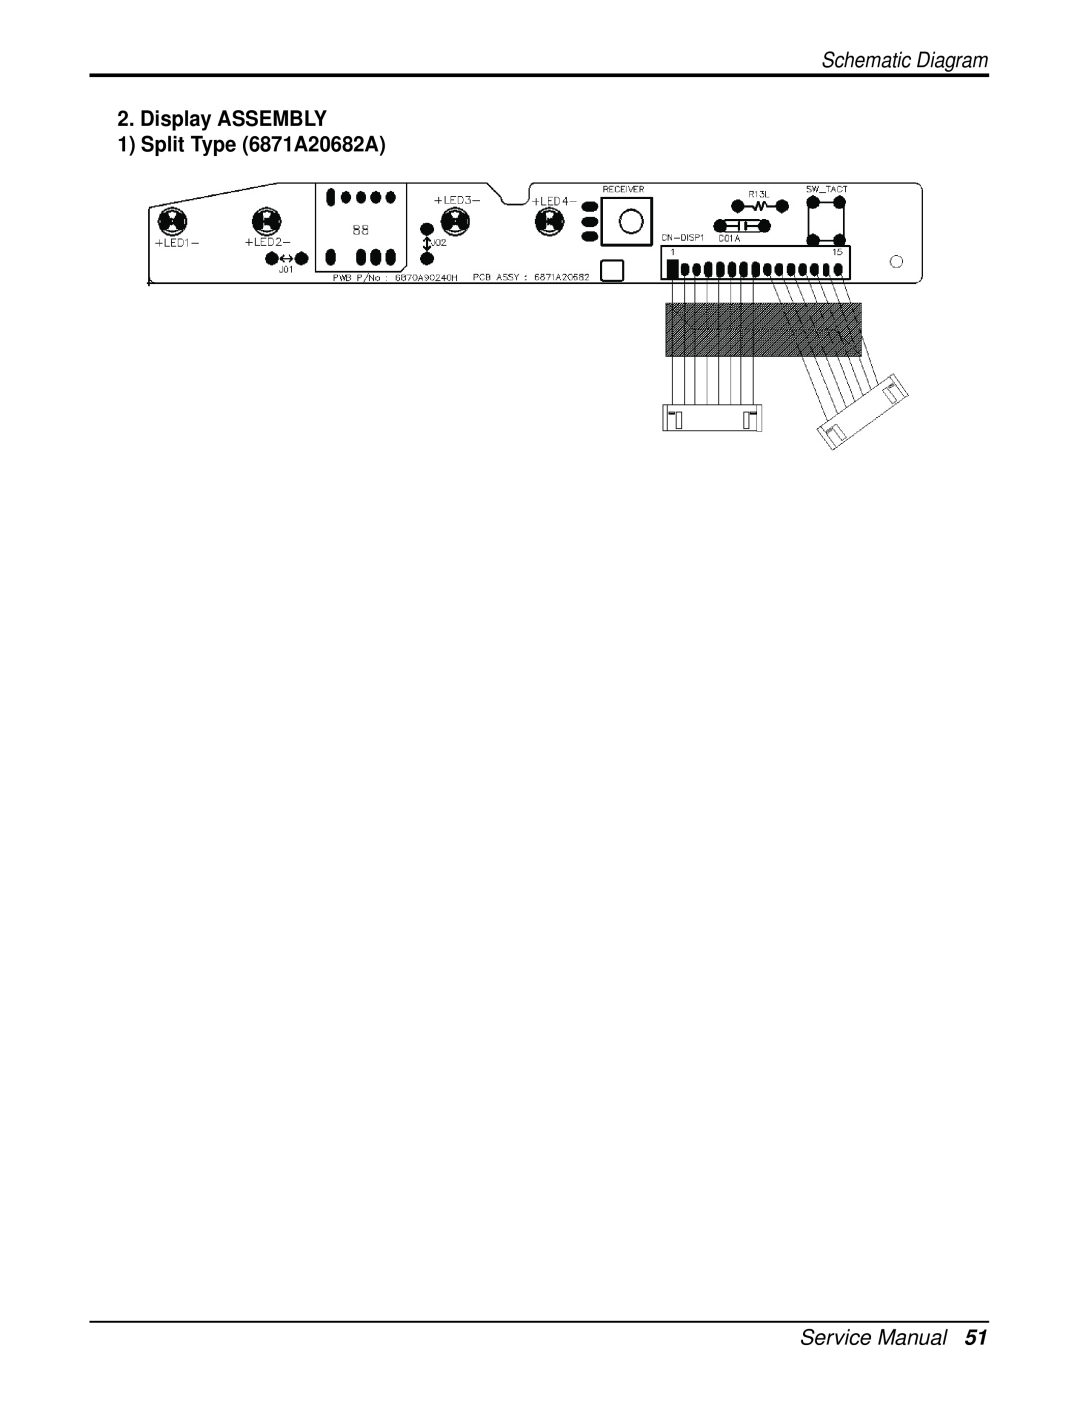 Heat Controller DMH18DB-1 manual Schematic Diagram, Display ASSEMBLY 1 Split Type 6871A20682A, Service Manual 